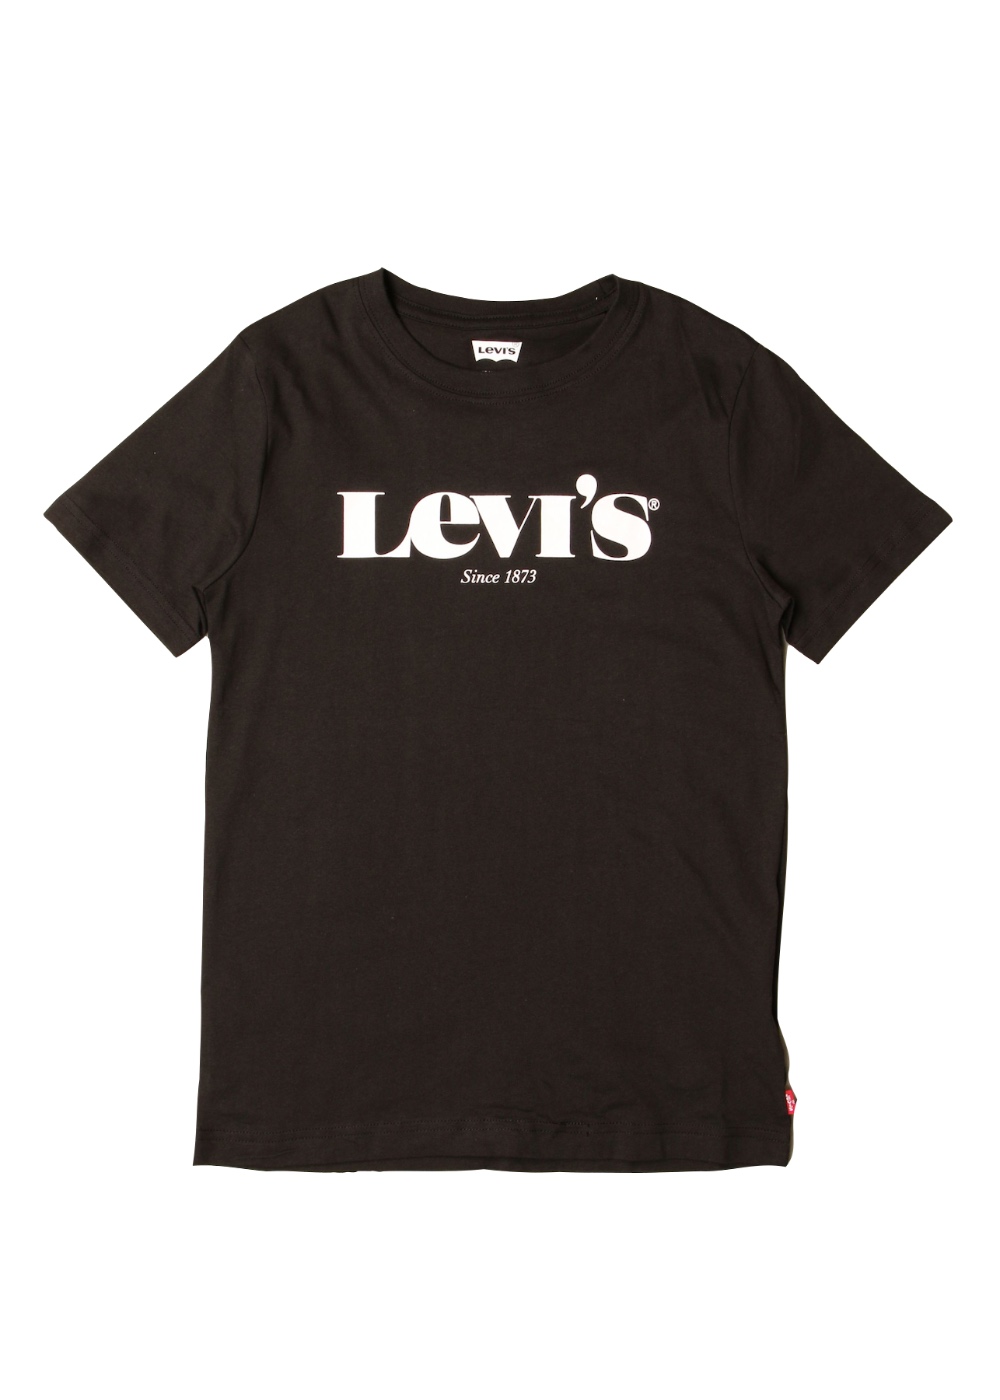 Featured image for “LEVI'S T-SHIRT CON LOGO”